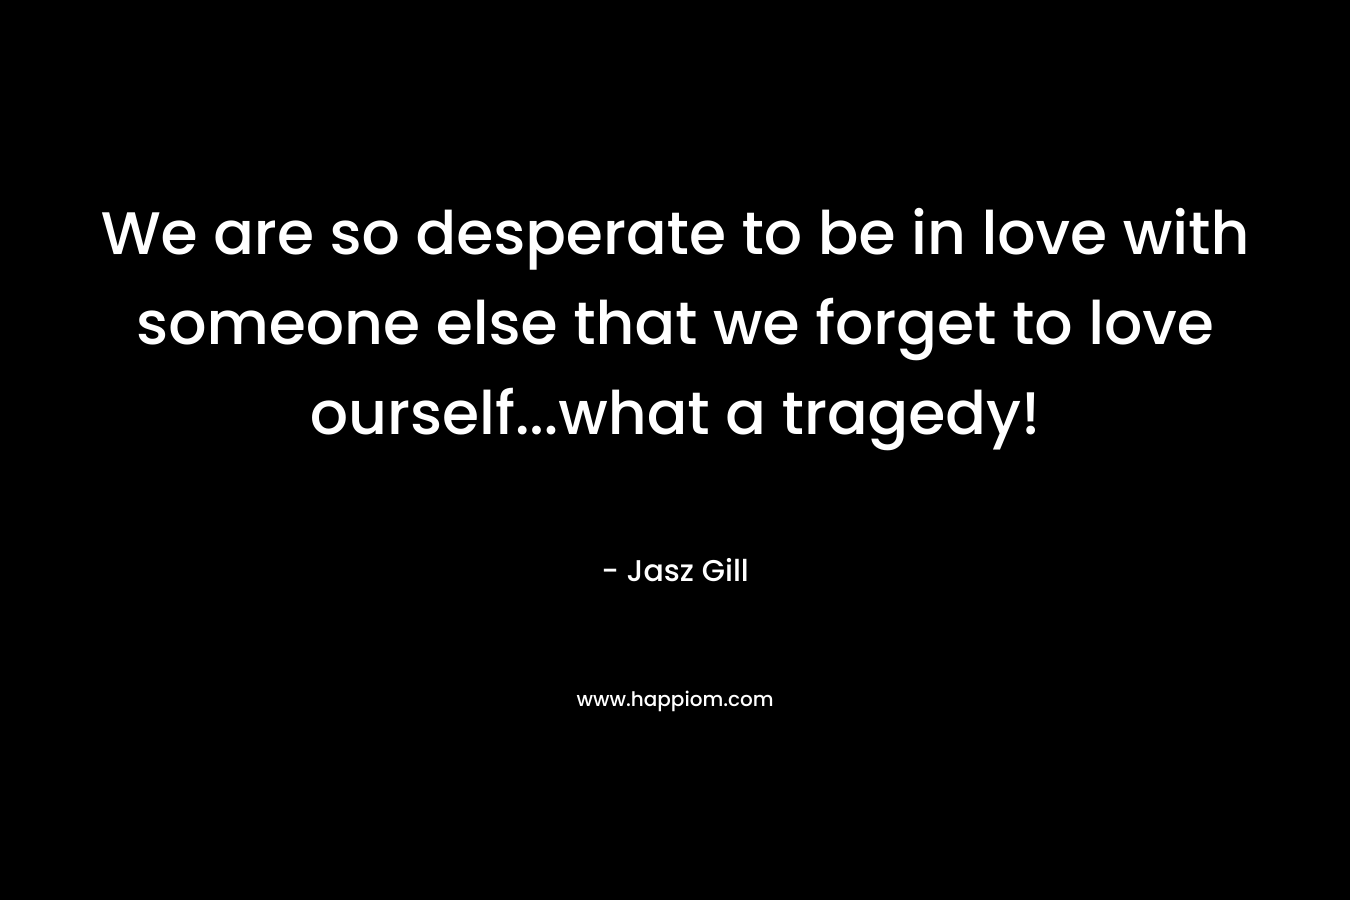 We are so desperate to be in love with someone else that we forget to love ourself...what a tragedy!